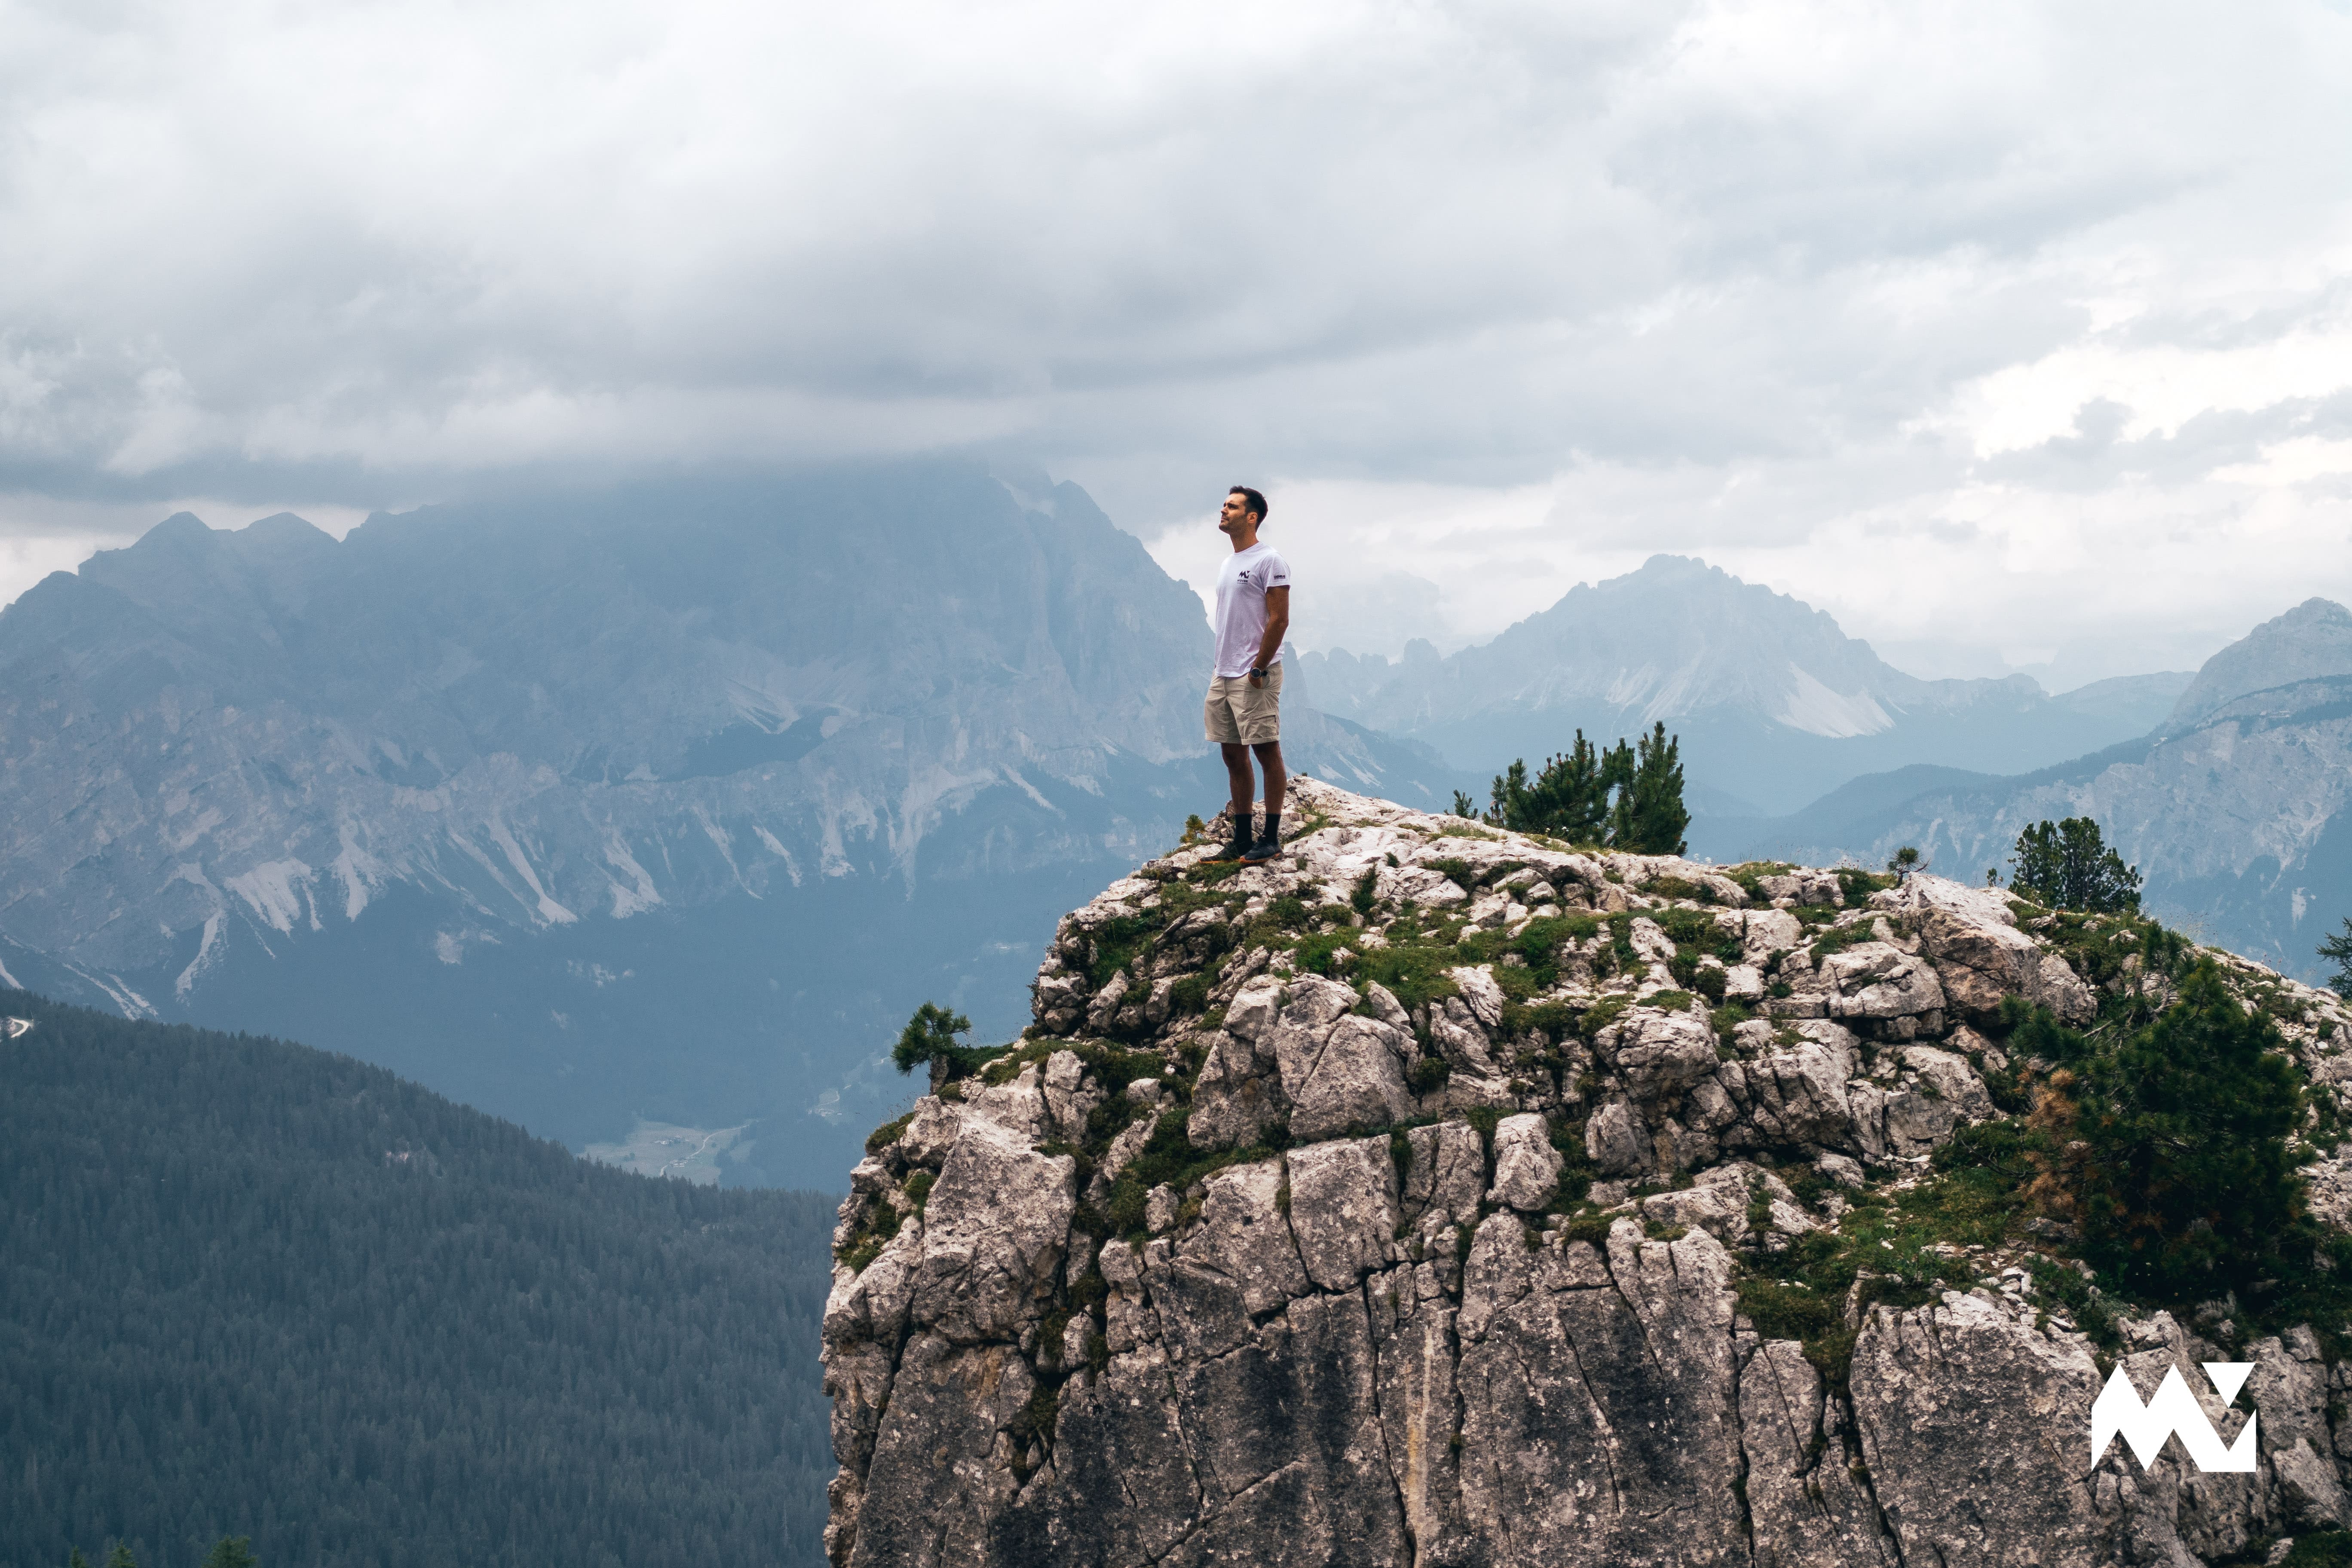 A hiker standing at the top of a mountain with the Dolomites' peaks in the background